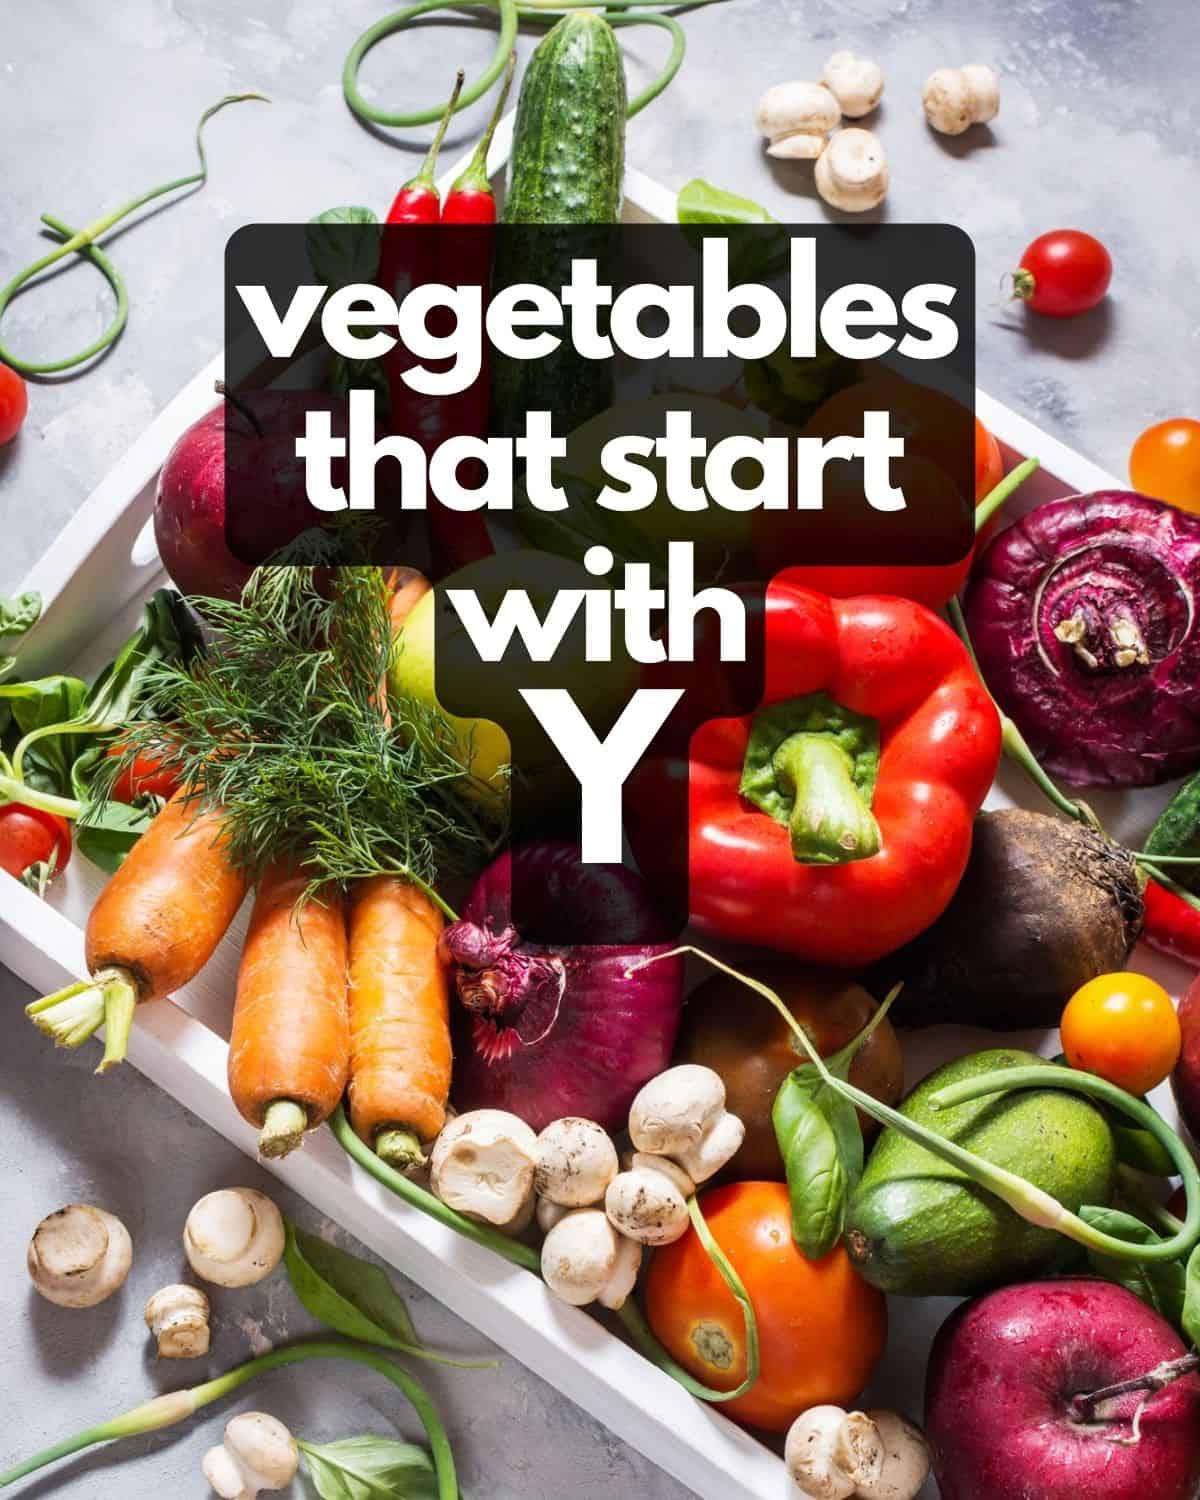 Table of vegetables, plus text: Vegetables that start with Y.